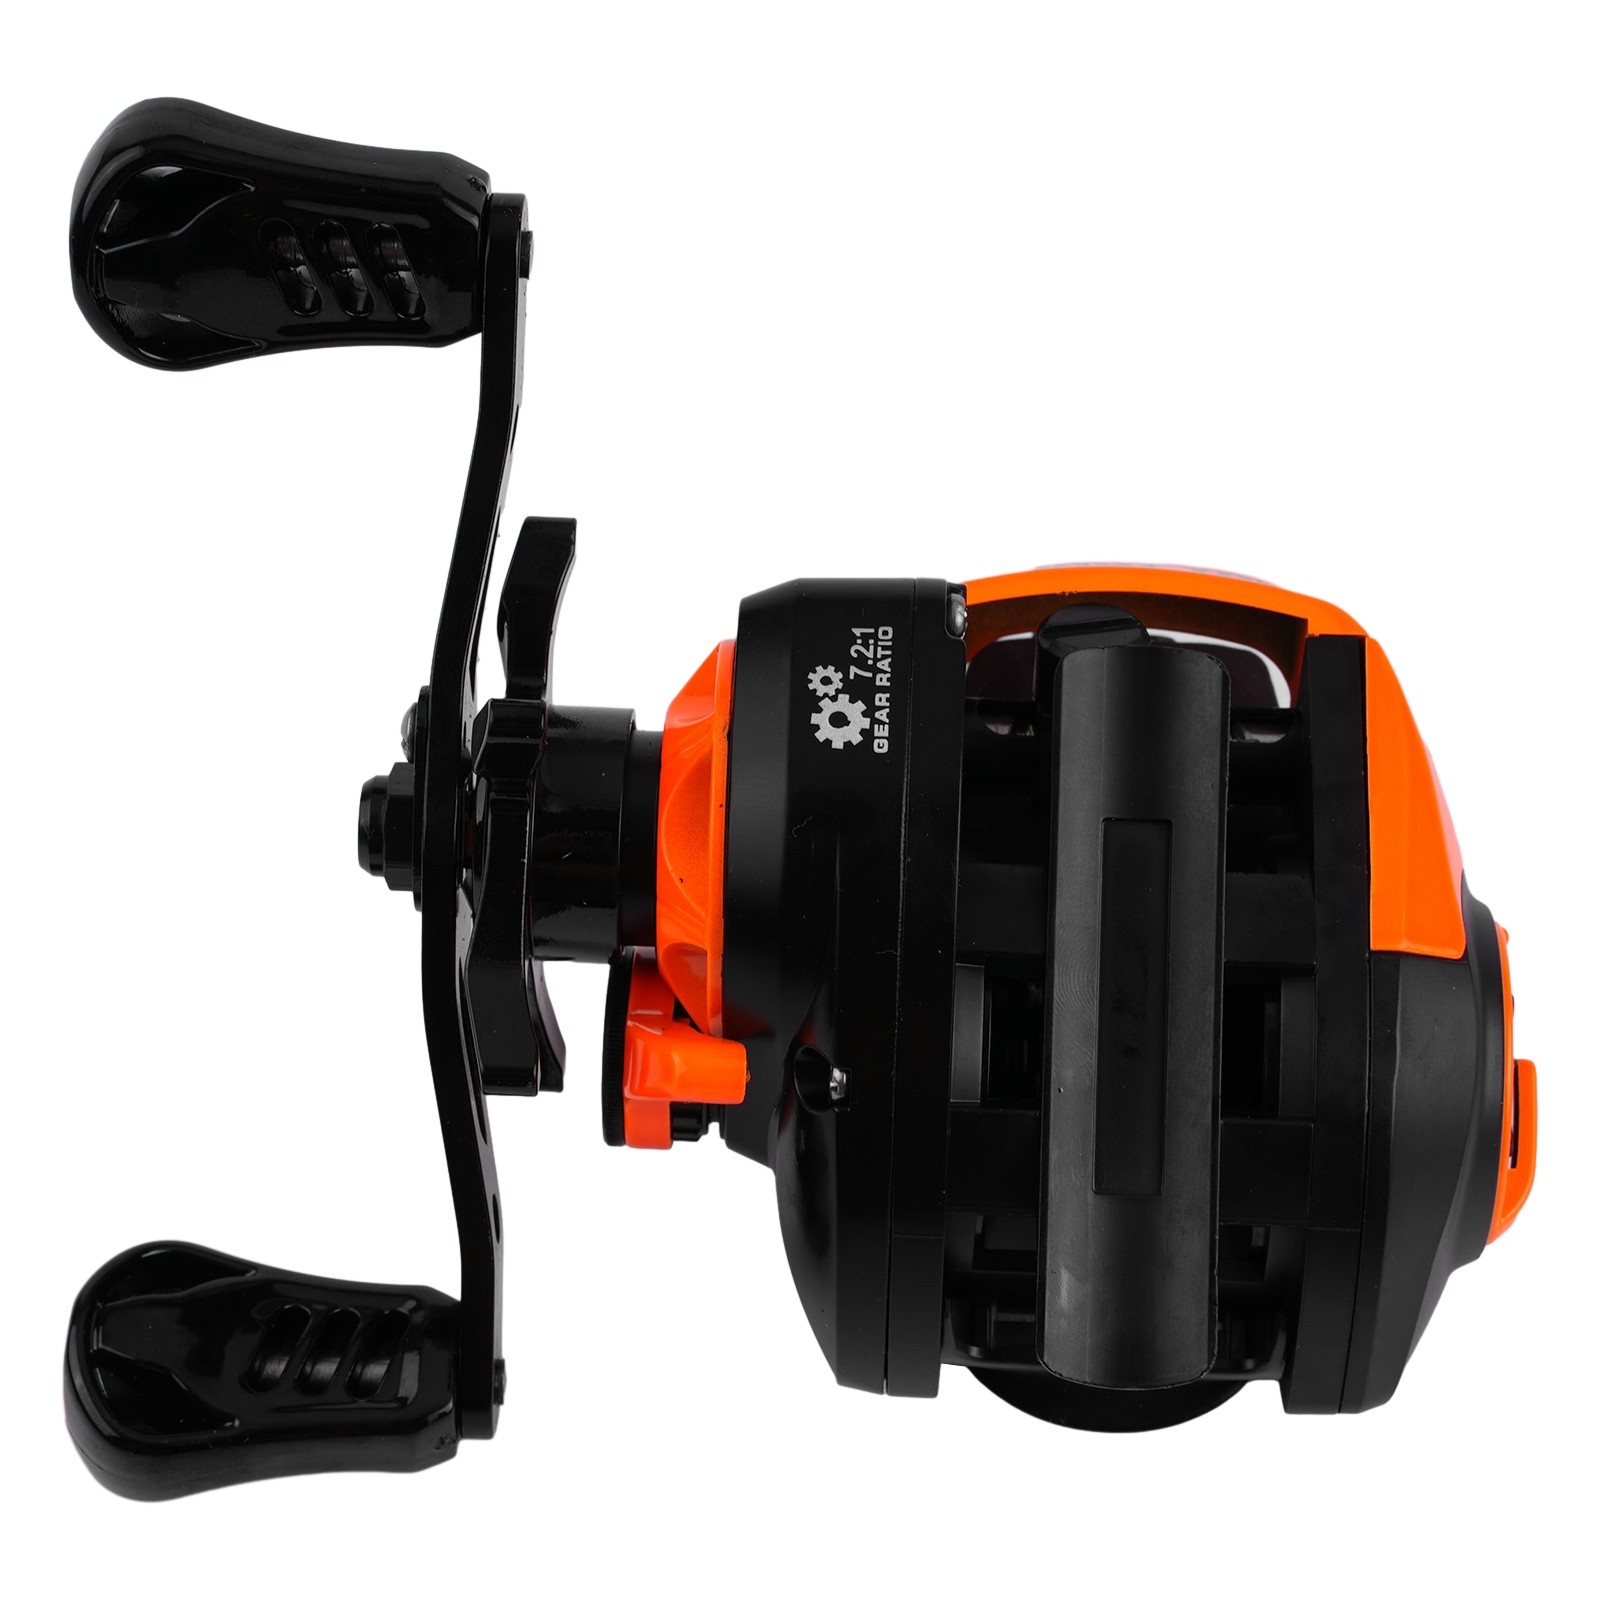 Digital Fishing Reel with Line Counter USB Charging Cable and Bite